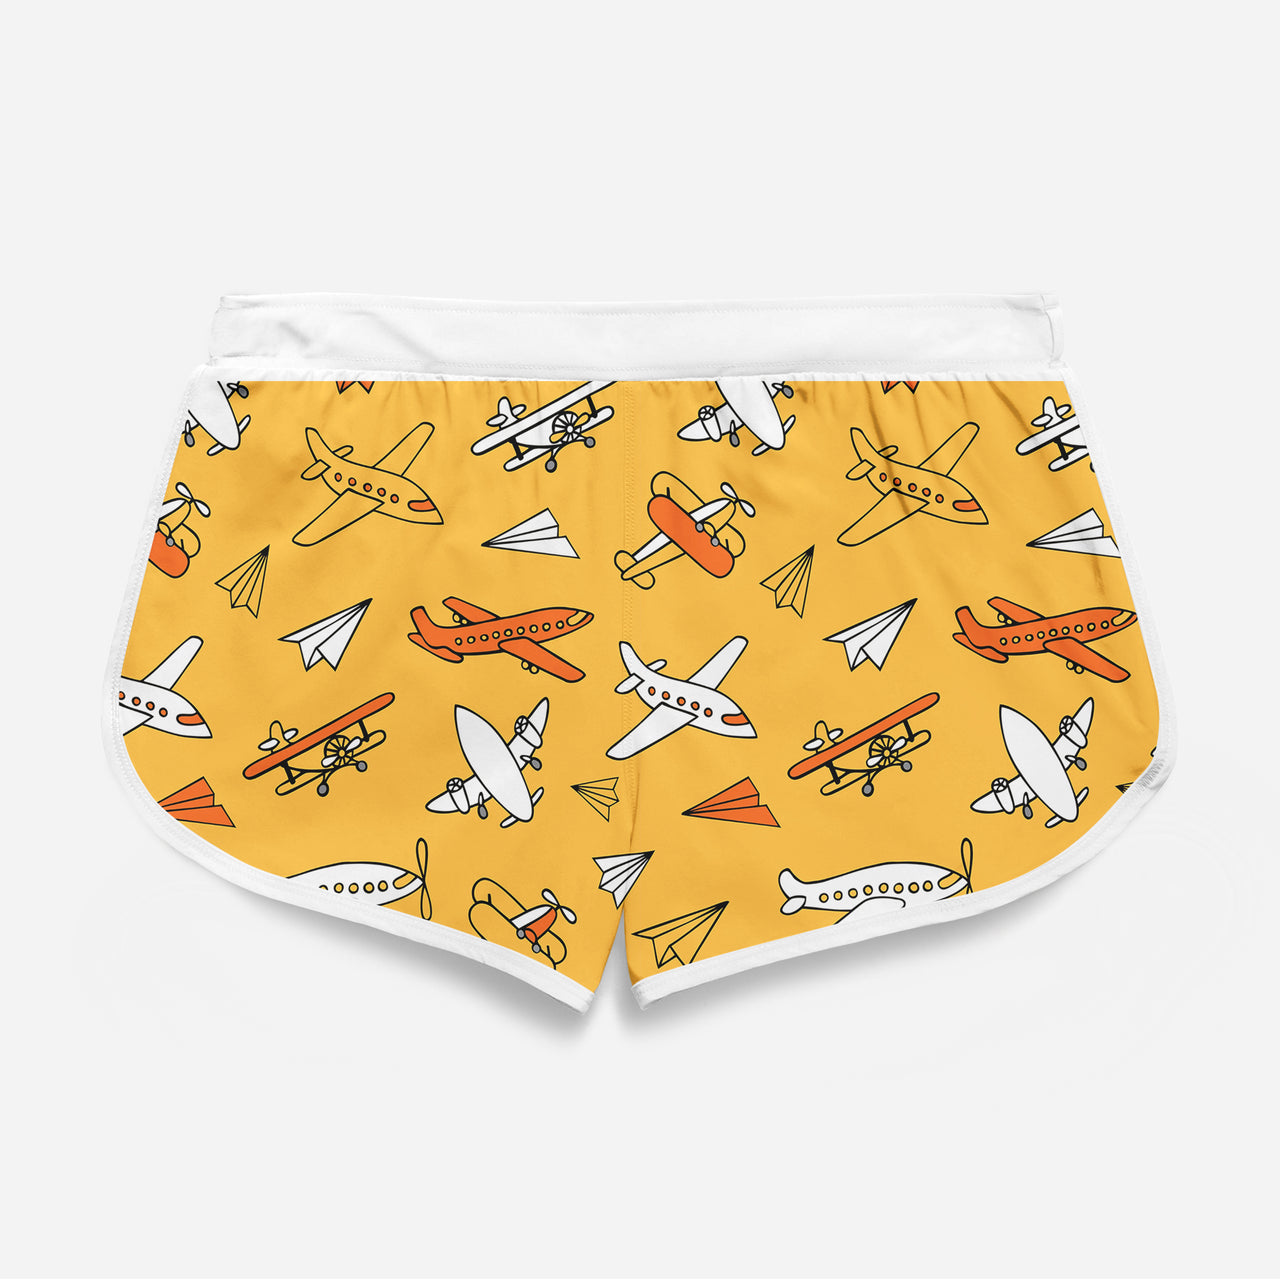 Super Drawings of Airplanes Designed Women Beach Style Shorts